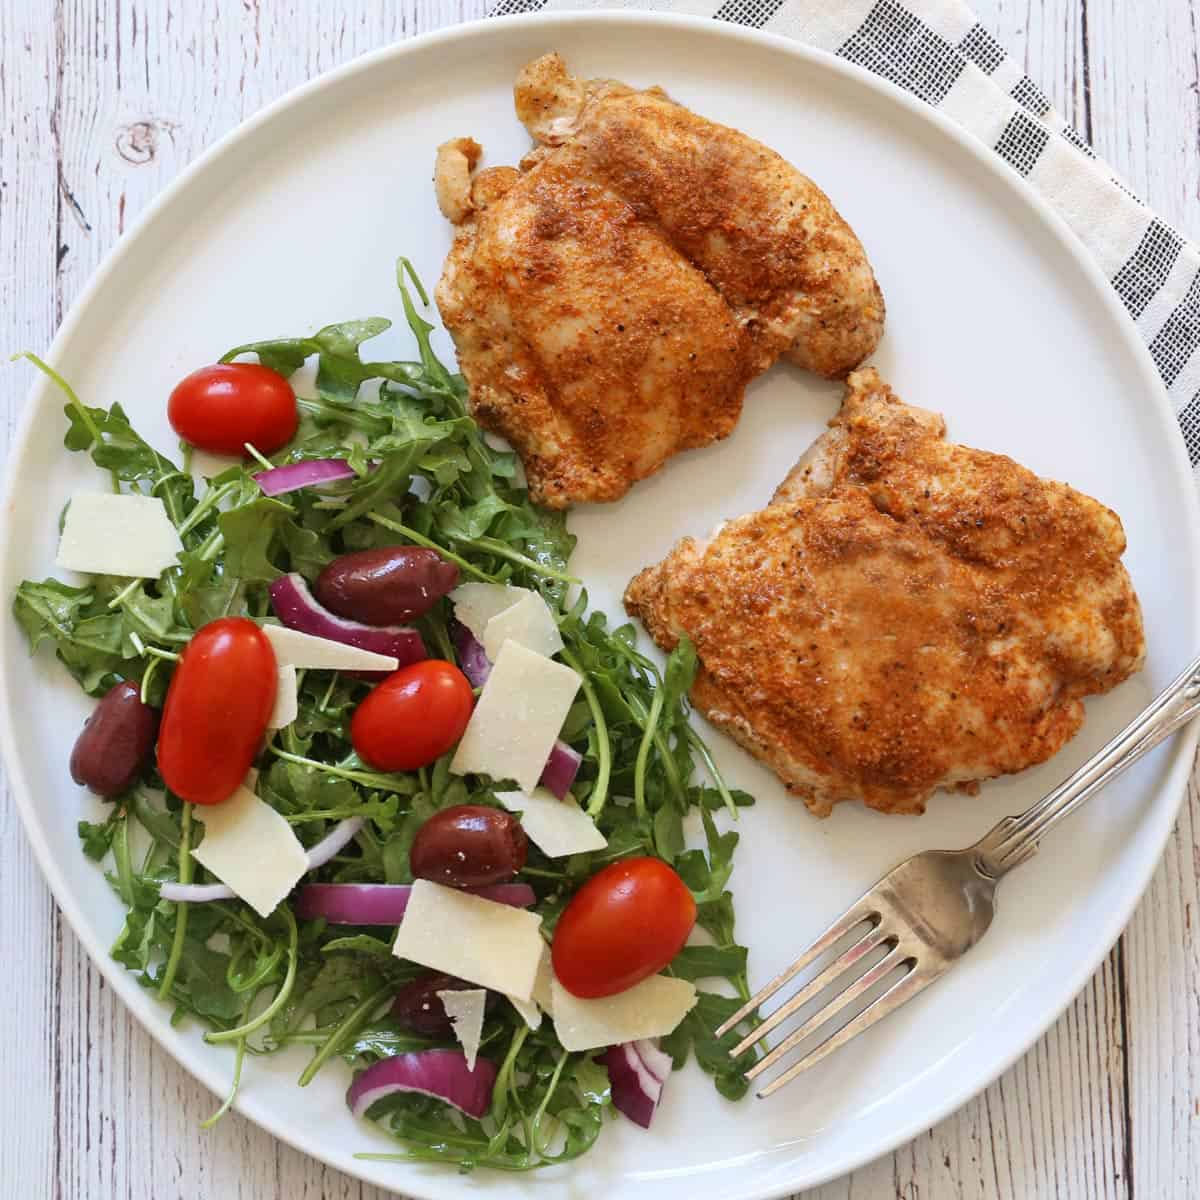 Arugula salad is served as a side dish to boneless chicken thighs.